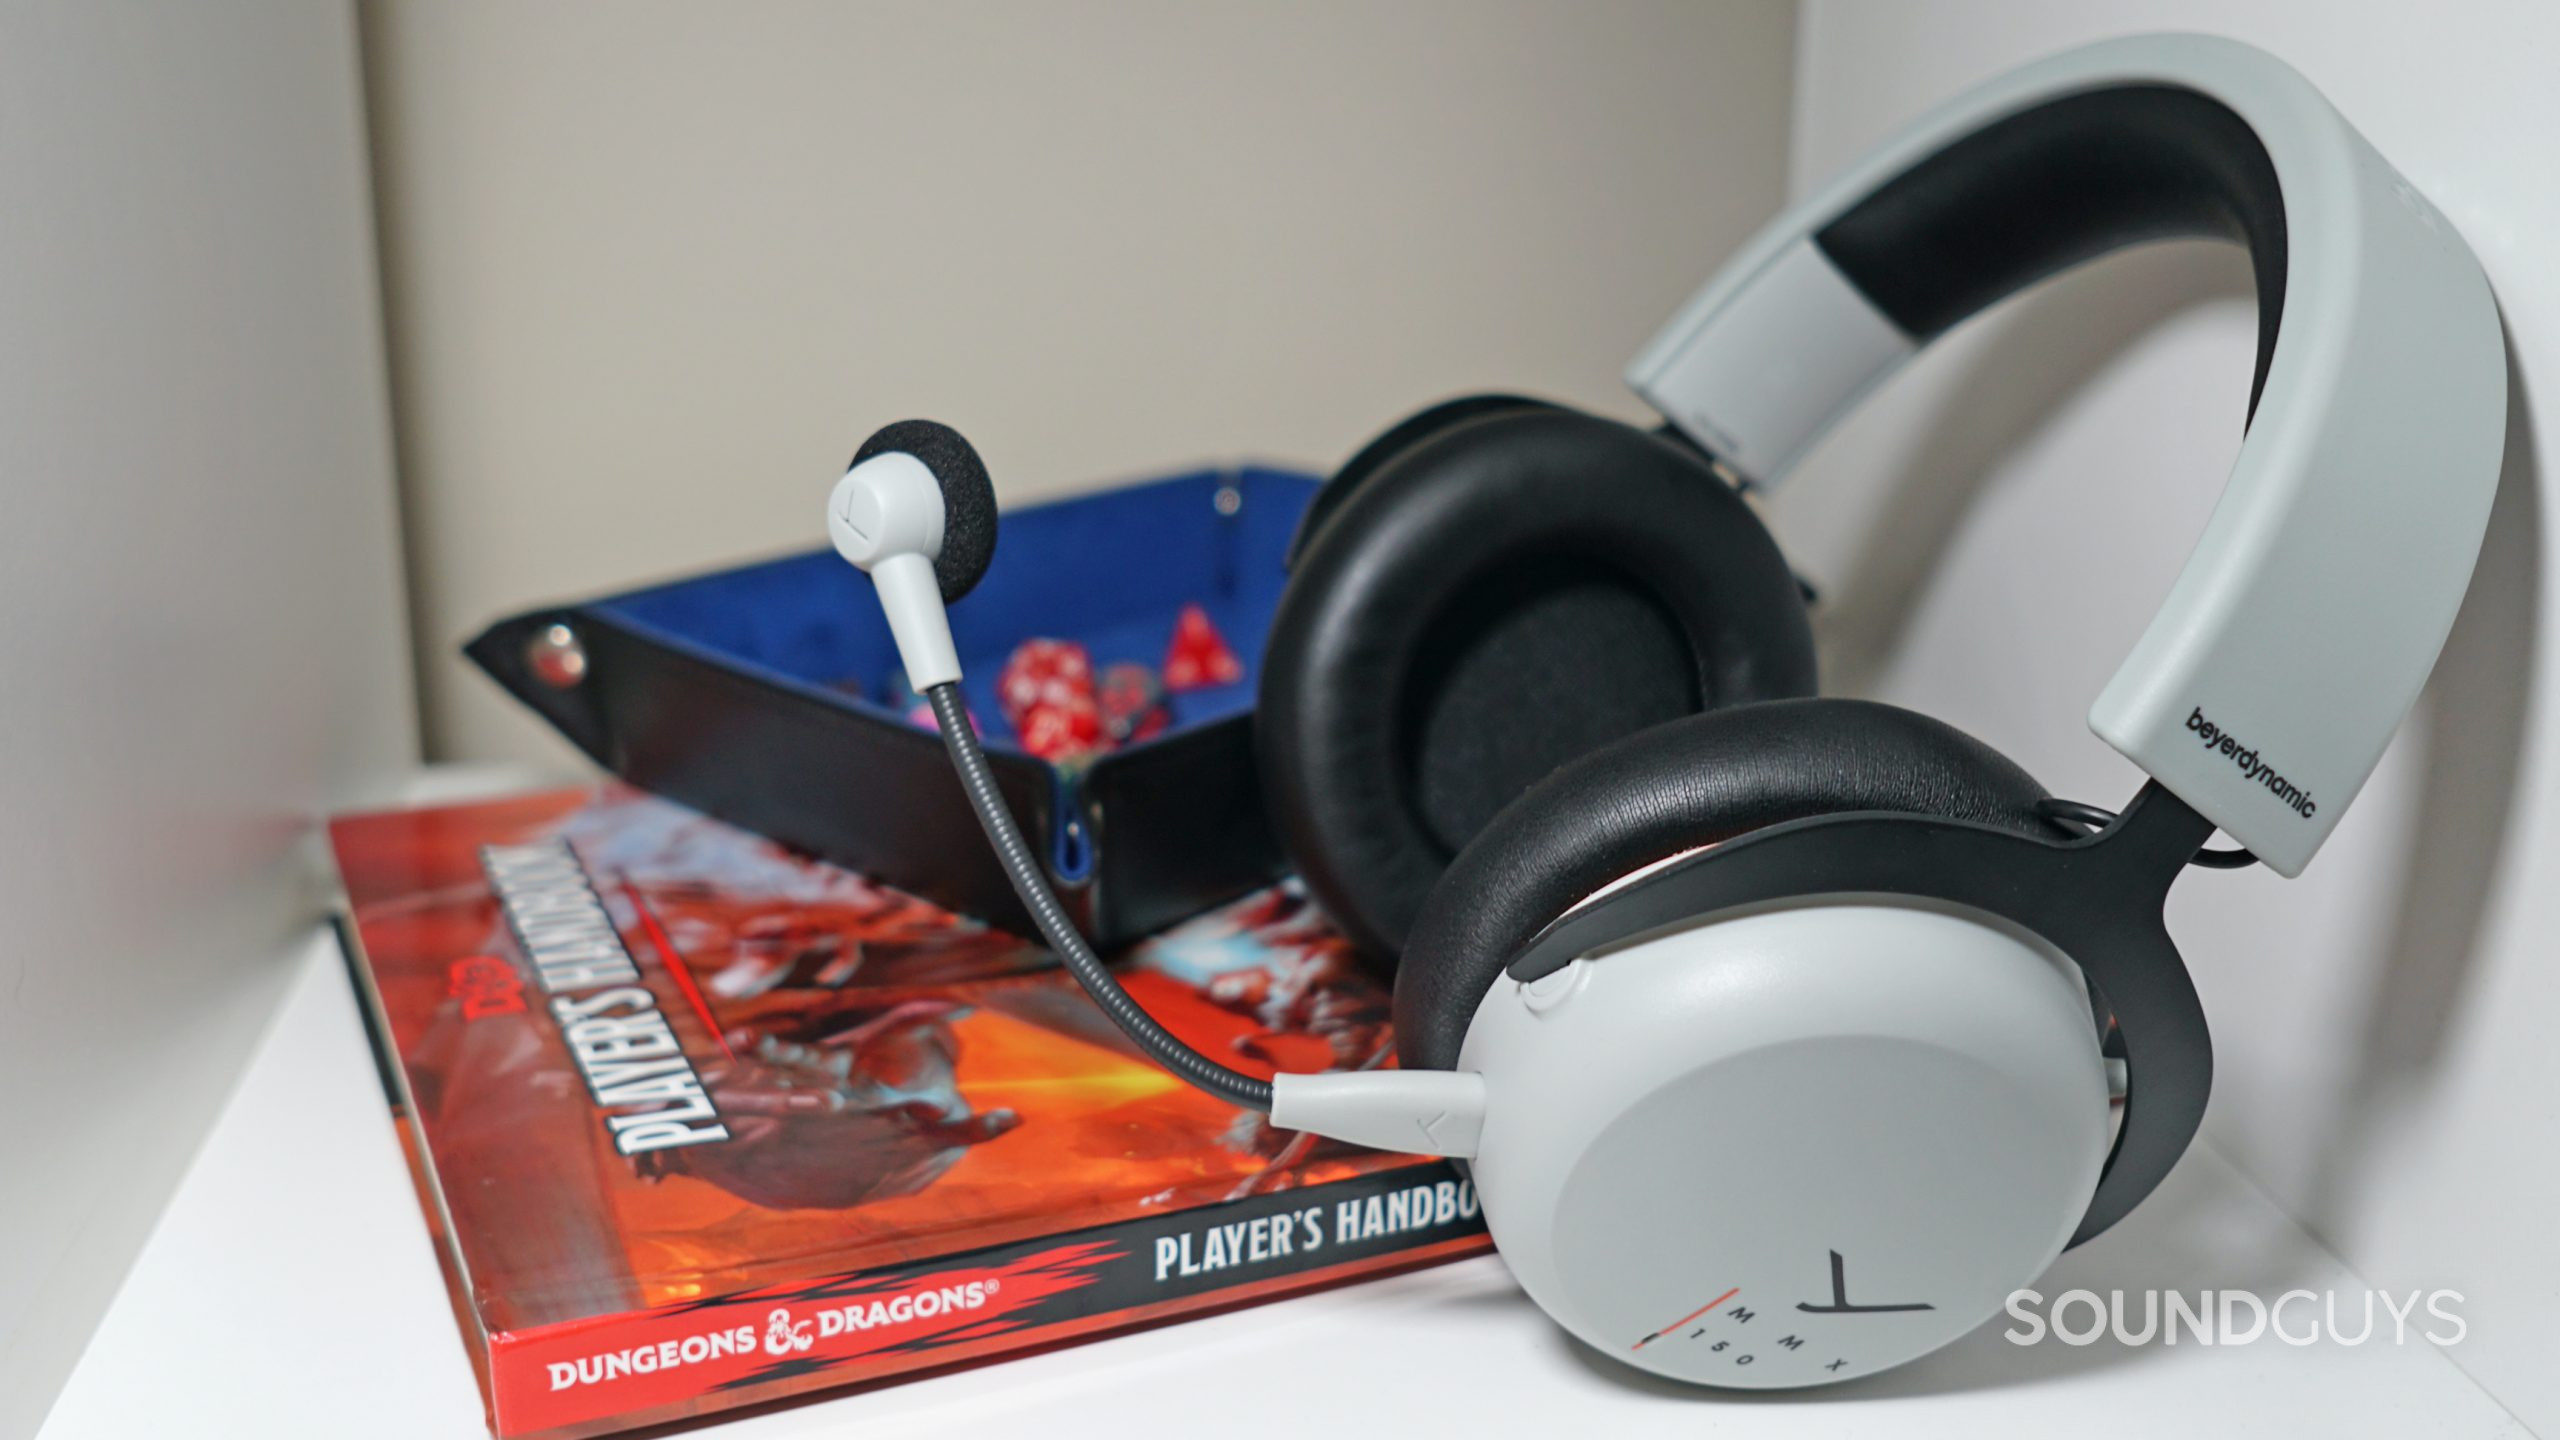 The Beyerdynamic MMX 150 lays on a white shelf next to a copy of the Dungeons and Dragons 5th edition Player's Handbook and some polyhedral dice.